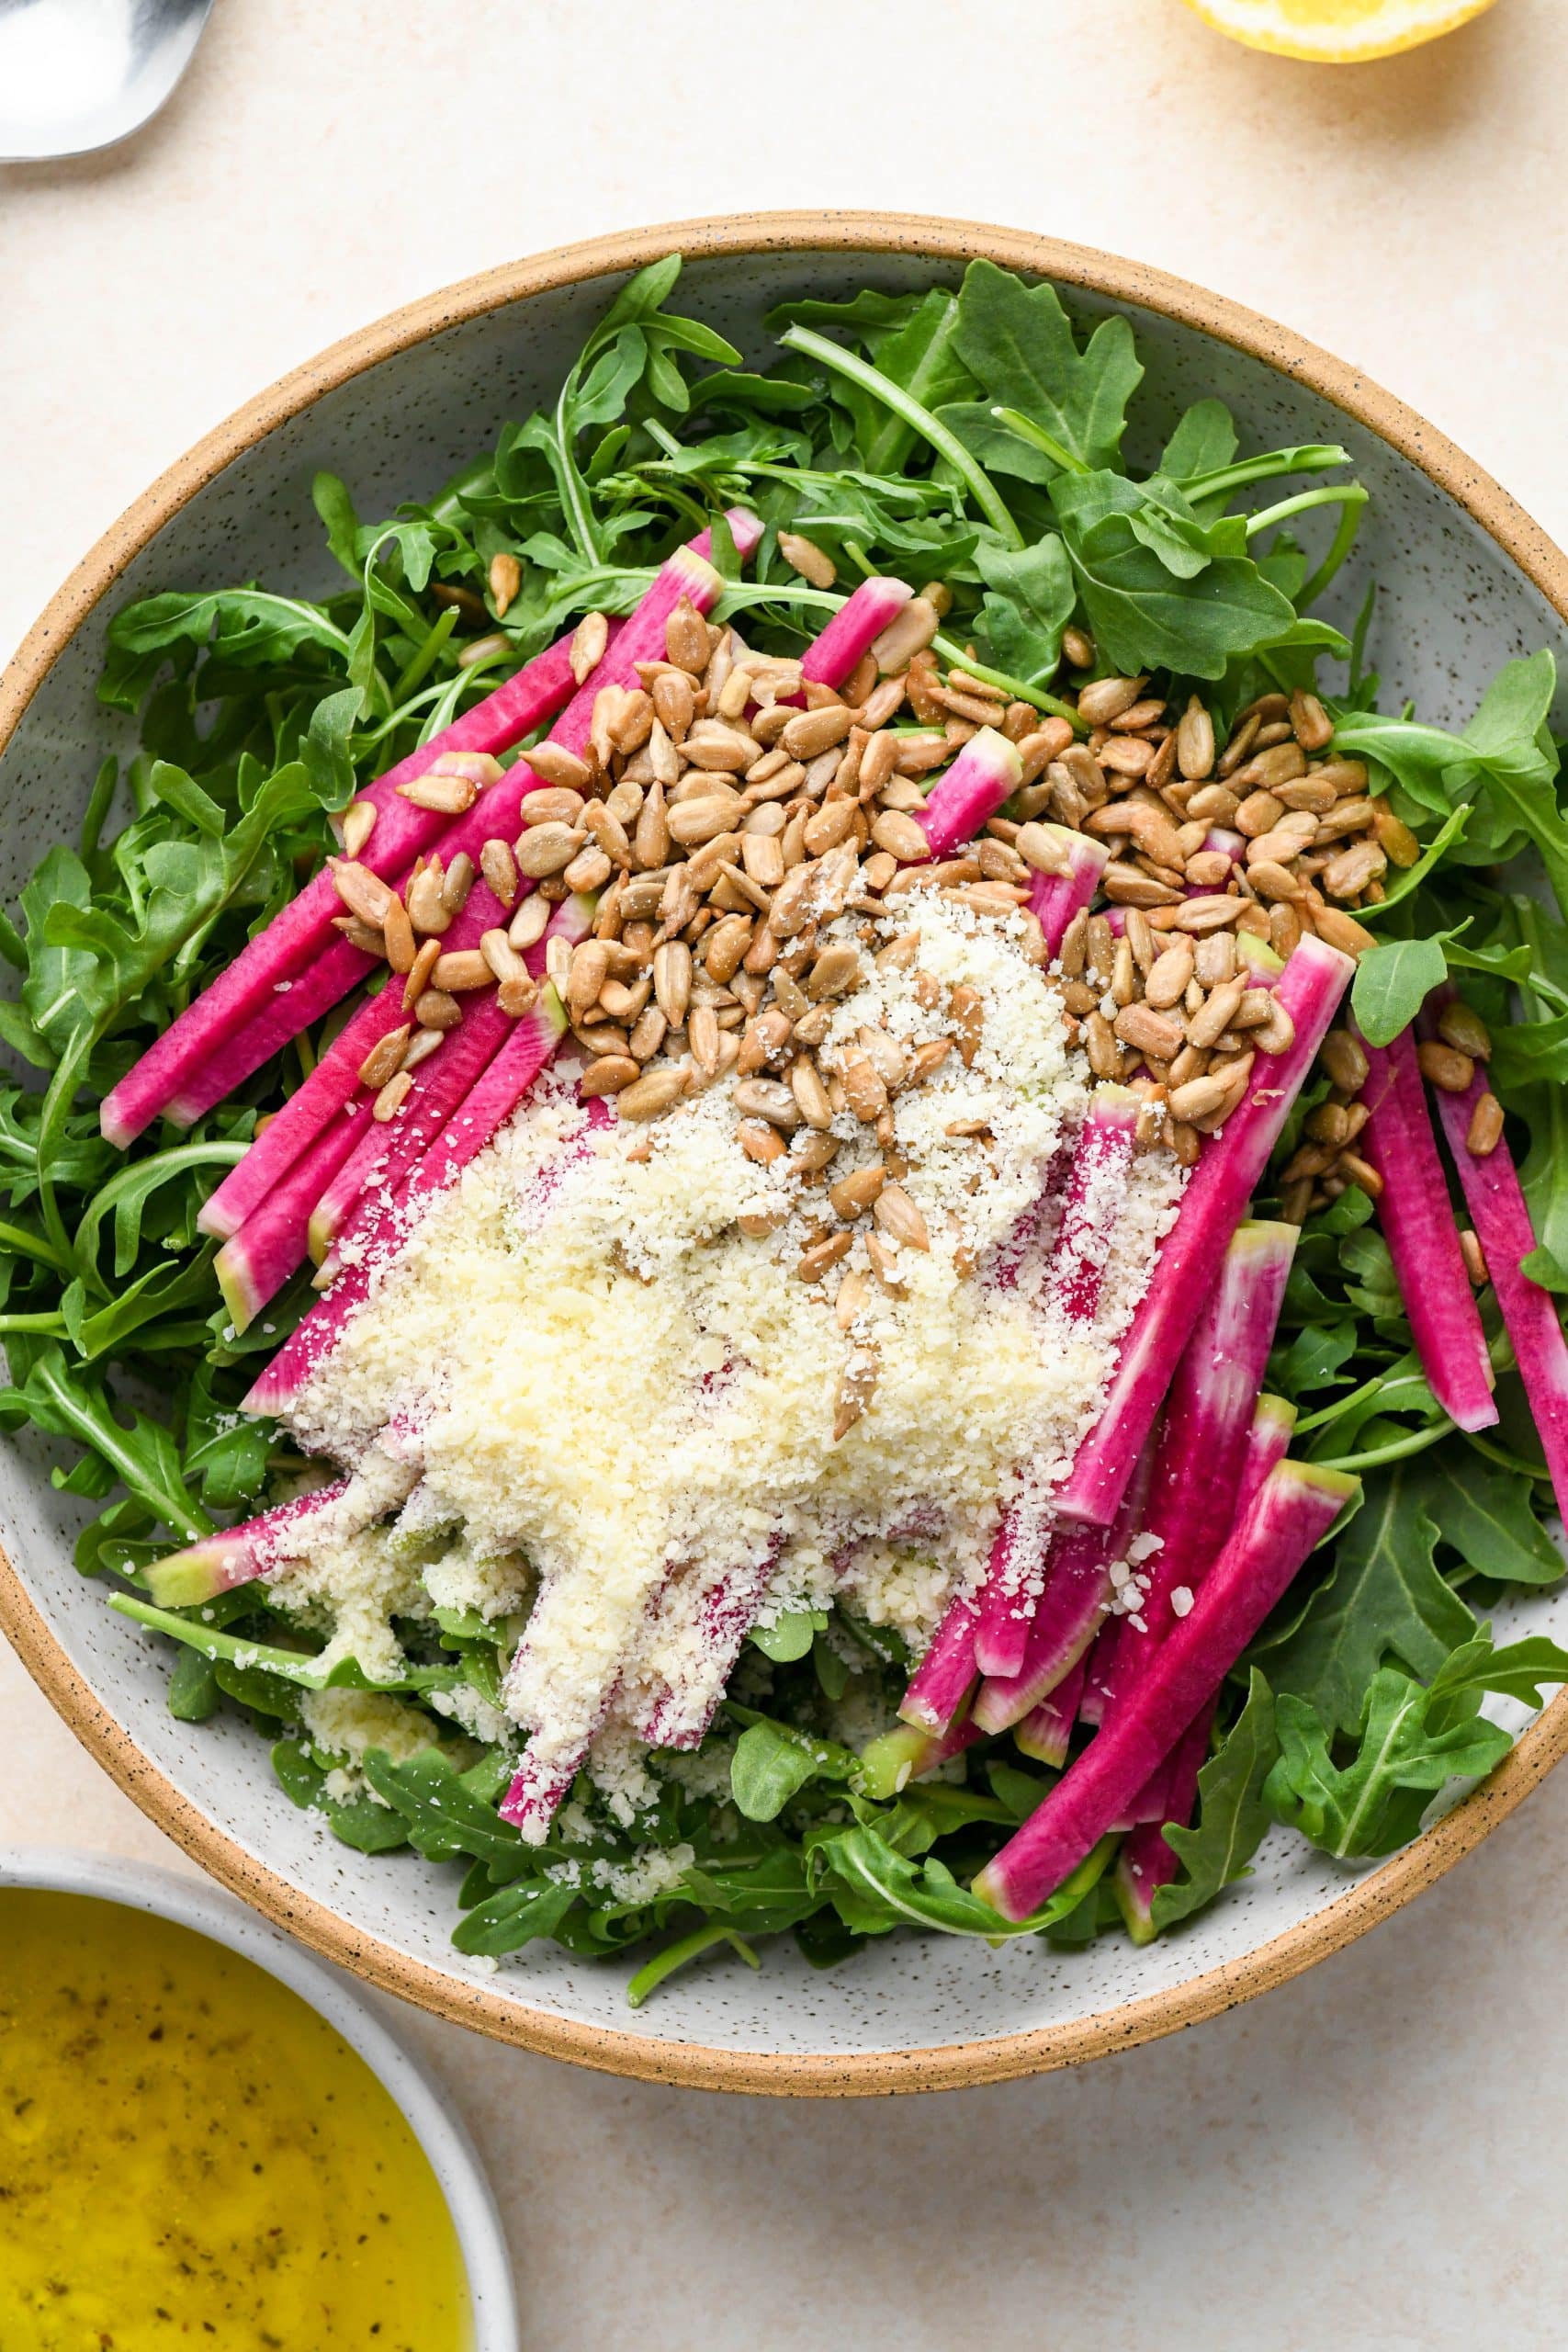 How to make Simple Arugula Salad: Arugula in a large bowl topped with julienned watermelon radish, sunflower seeds, and grated parmesan.